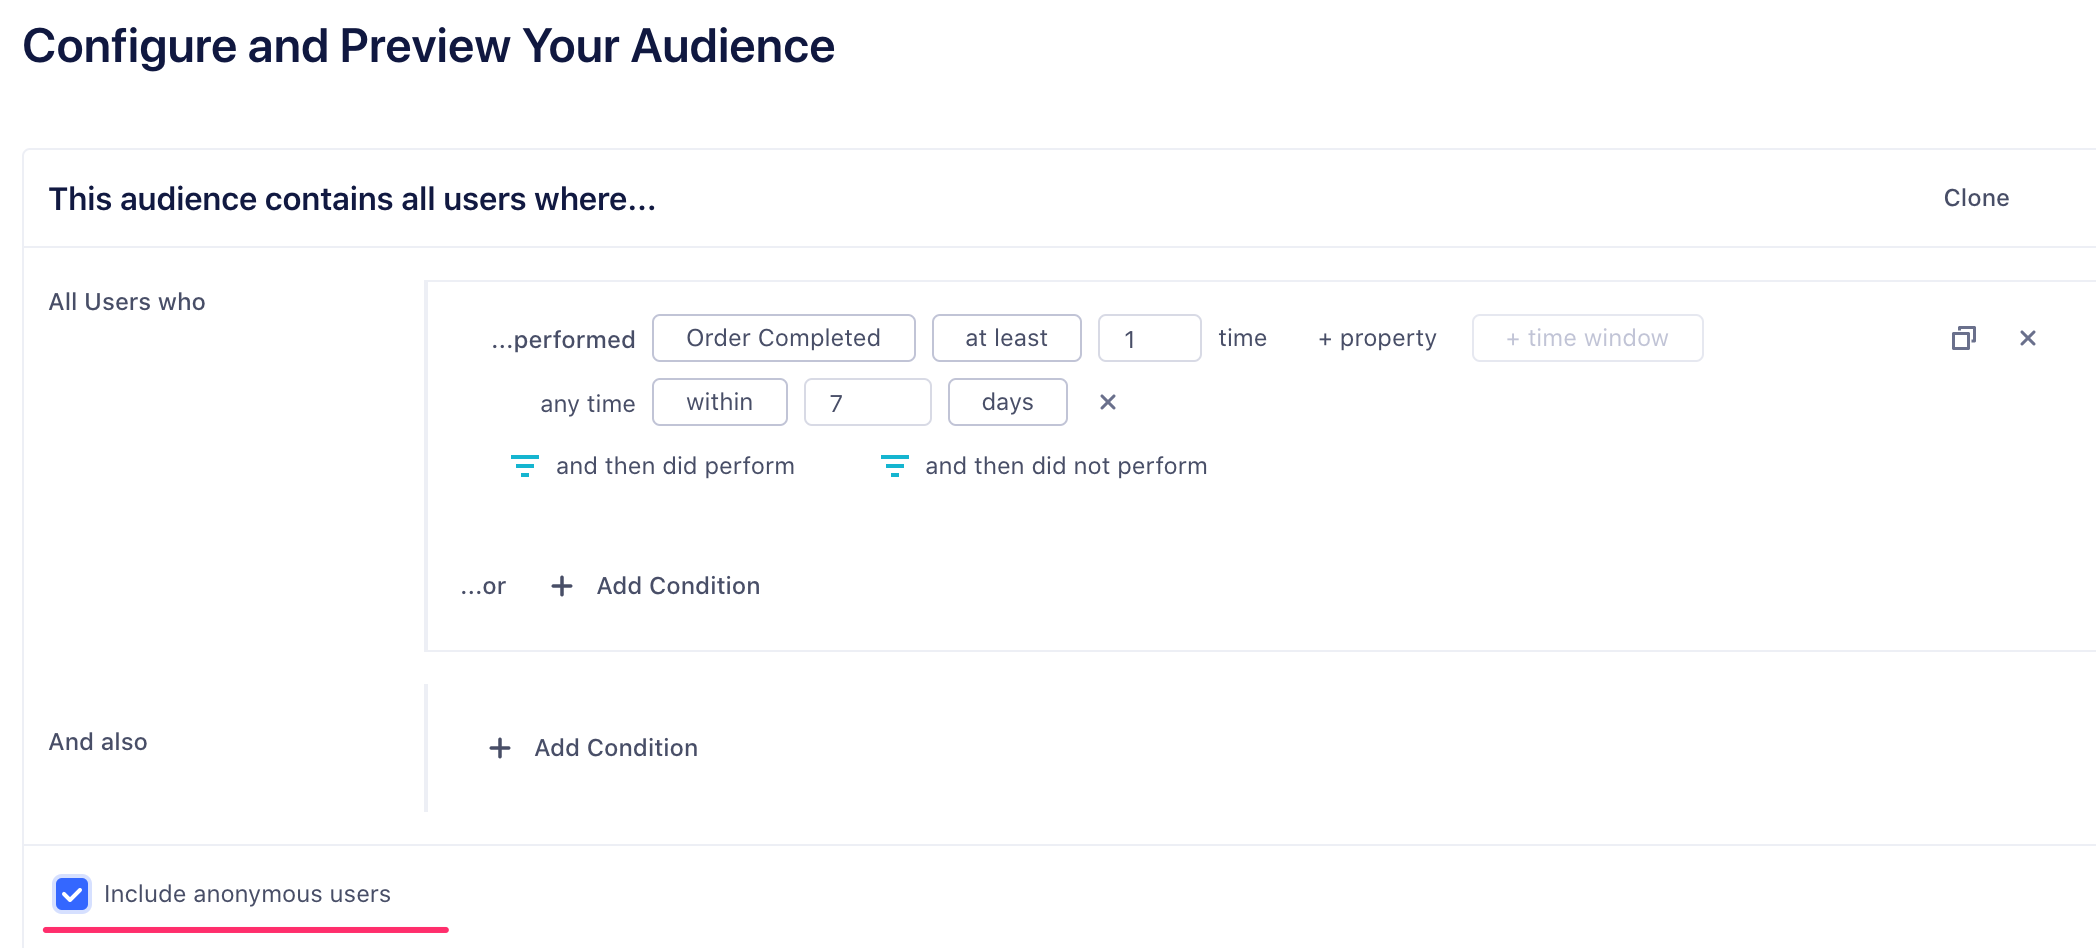 A screenshot of the Configure and Preview Your Audience page in Segment, with an line under the Include anonymous users setting.